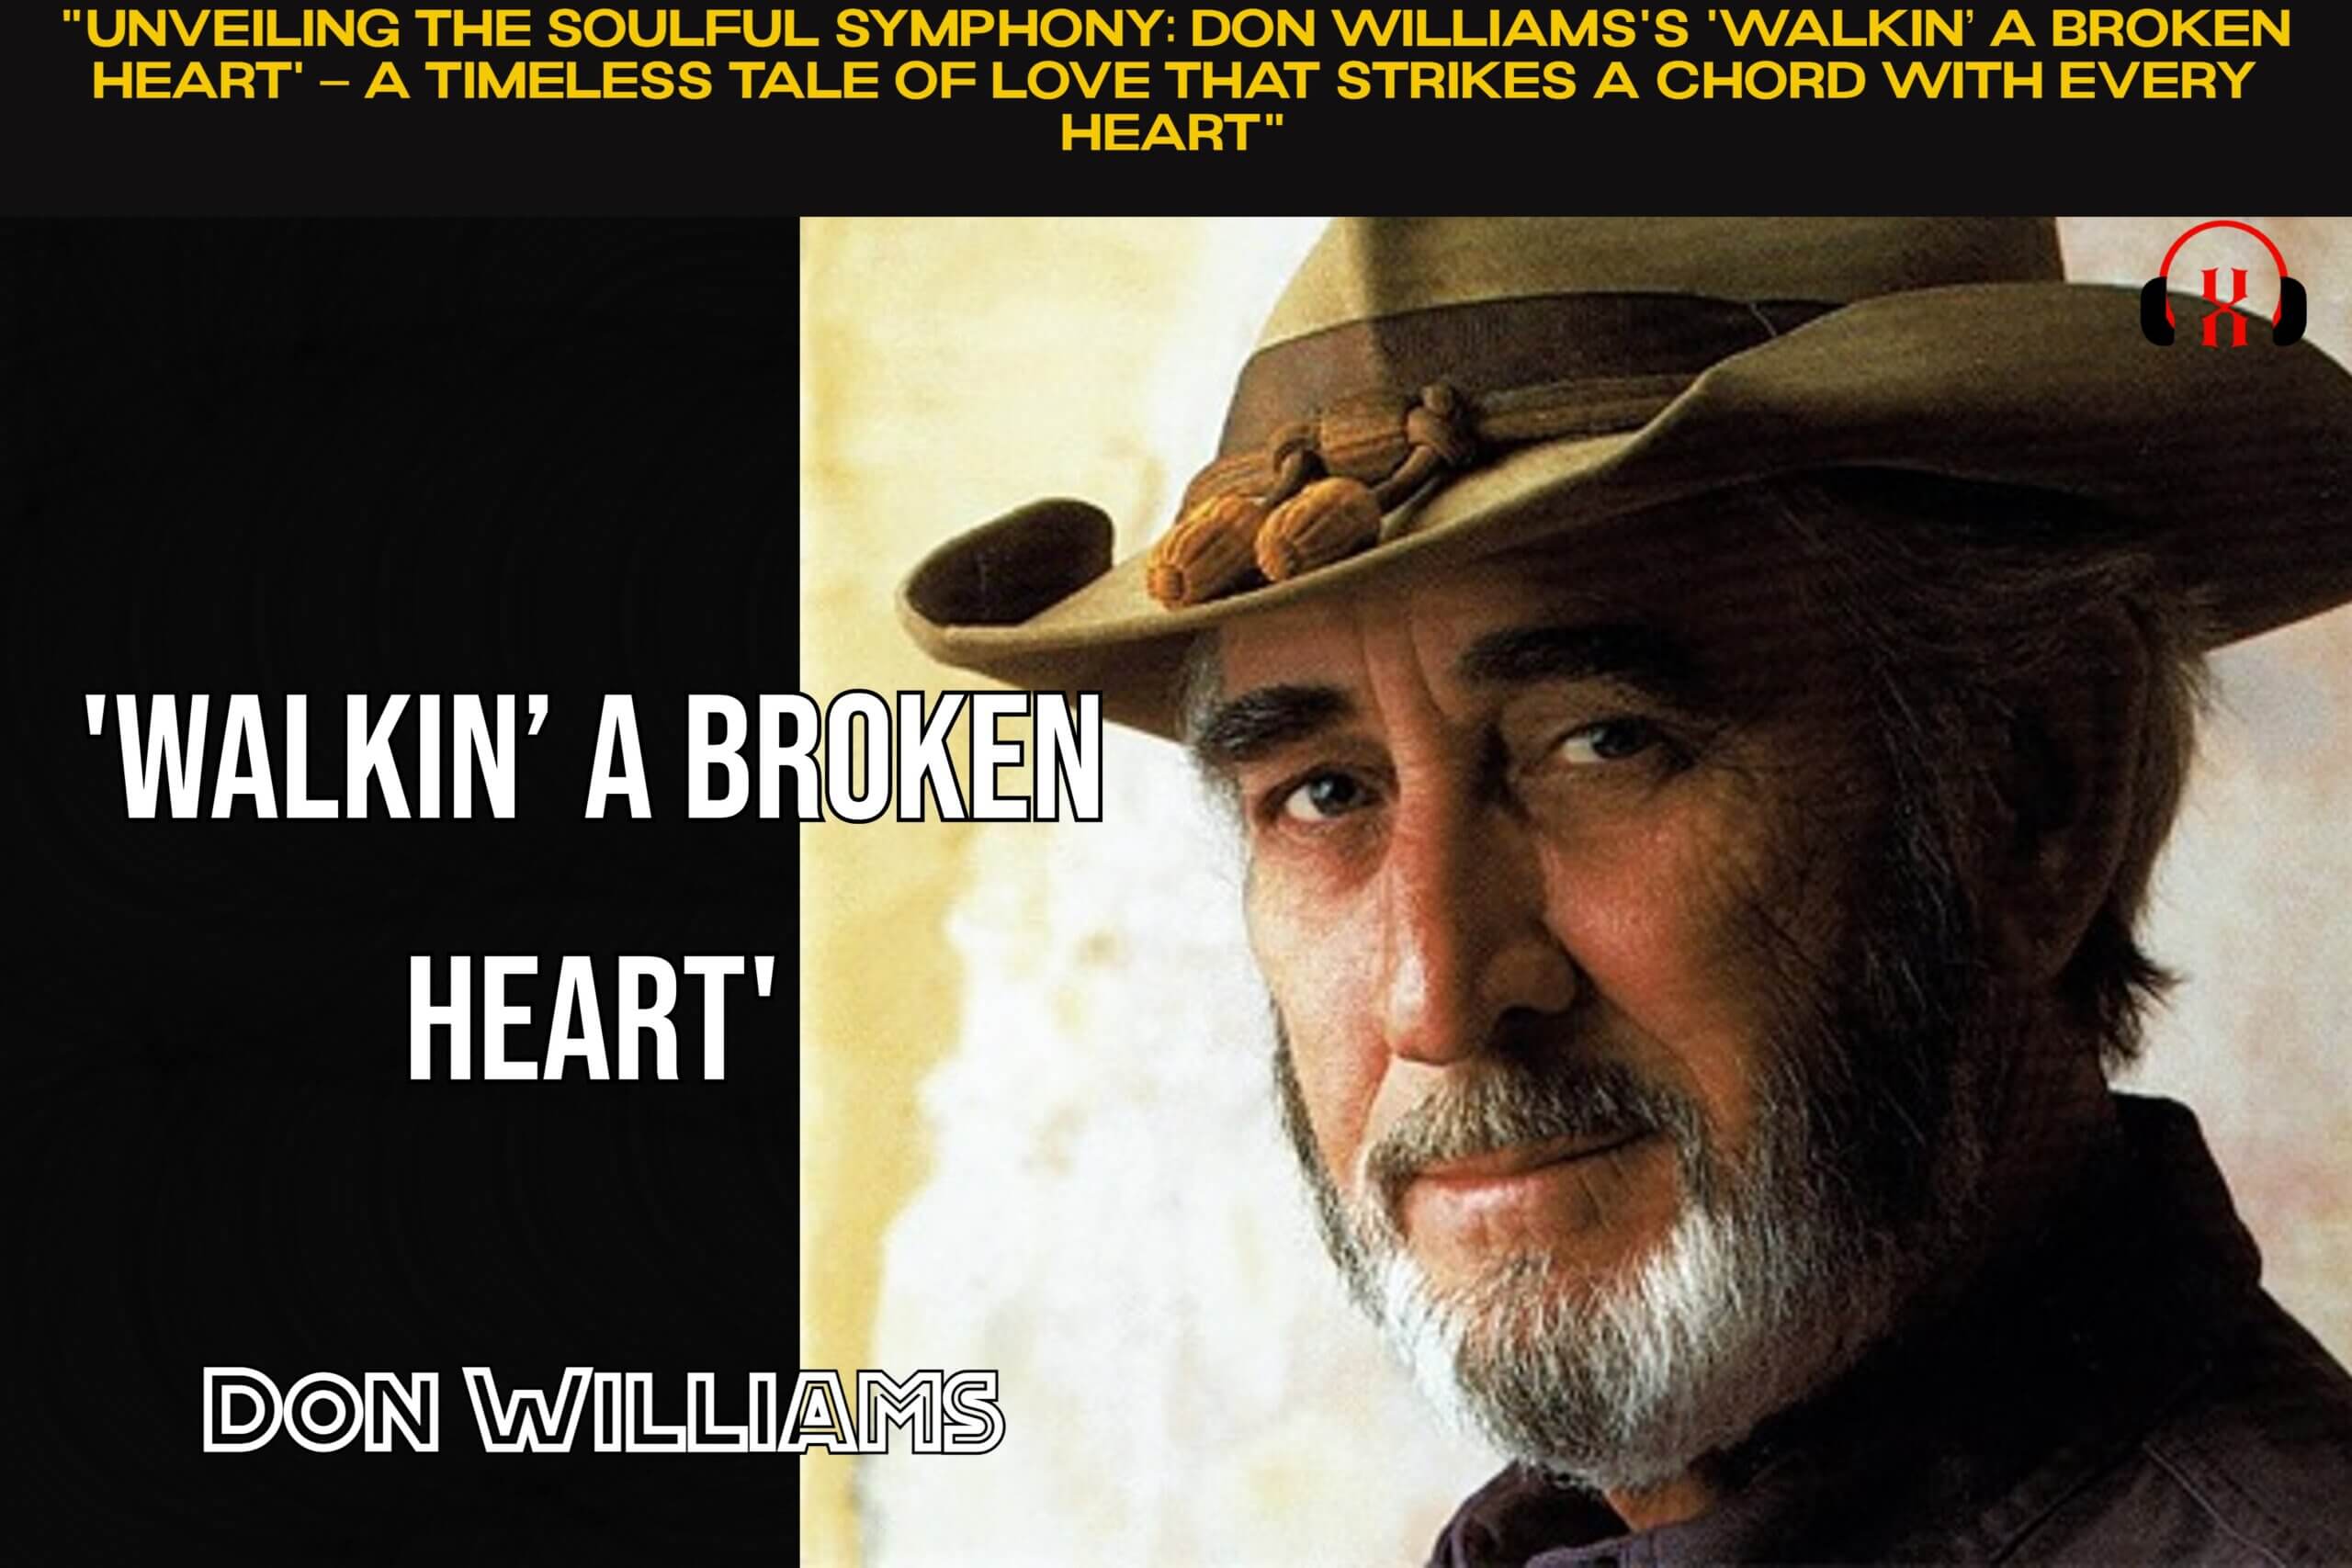 “Unveiling the Soulful Symphony: Don Williams’s ‘Walkin’ a Broken Heart’ – A Timeless Tale of Love That Strikes a Chord with Every Heart”